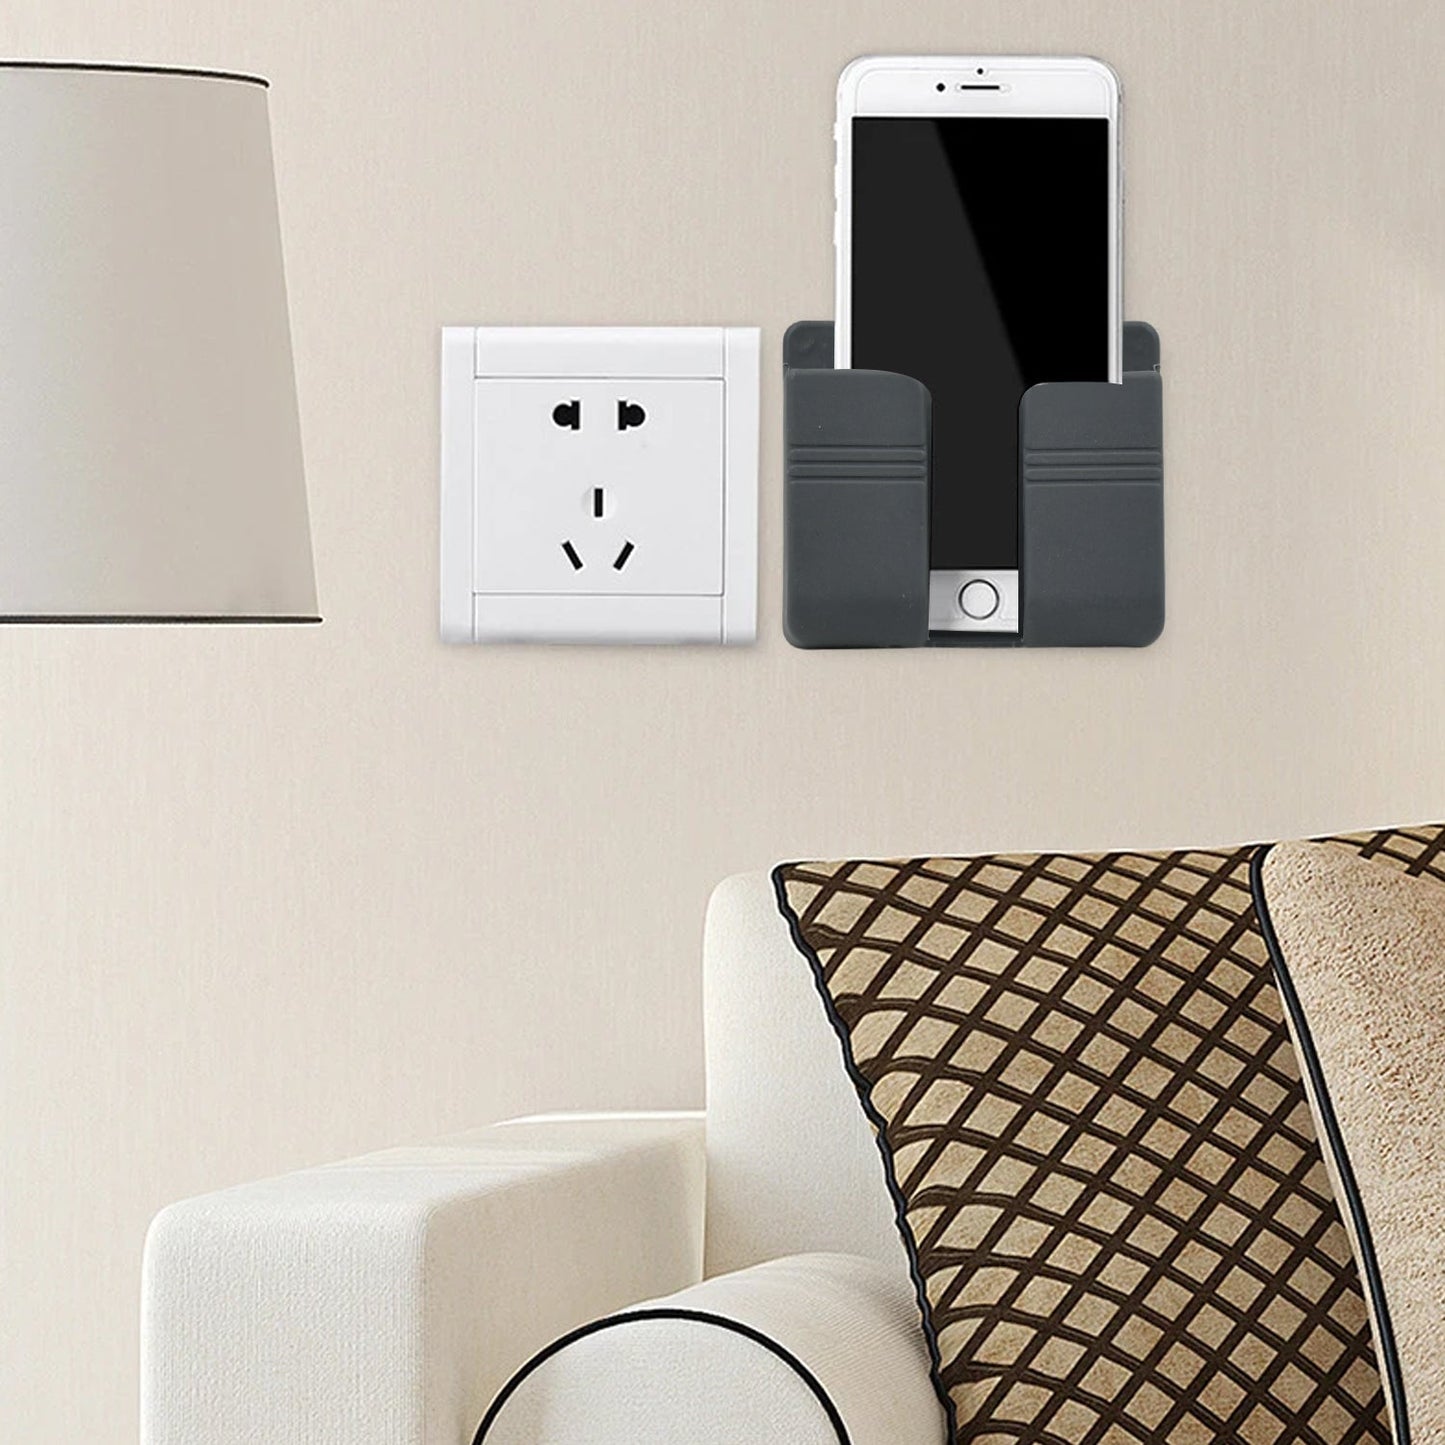 Adhesive Wall Mounted Mobile & Remote Holder (Pack of 4)